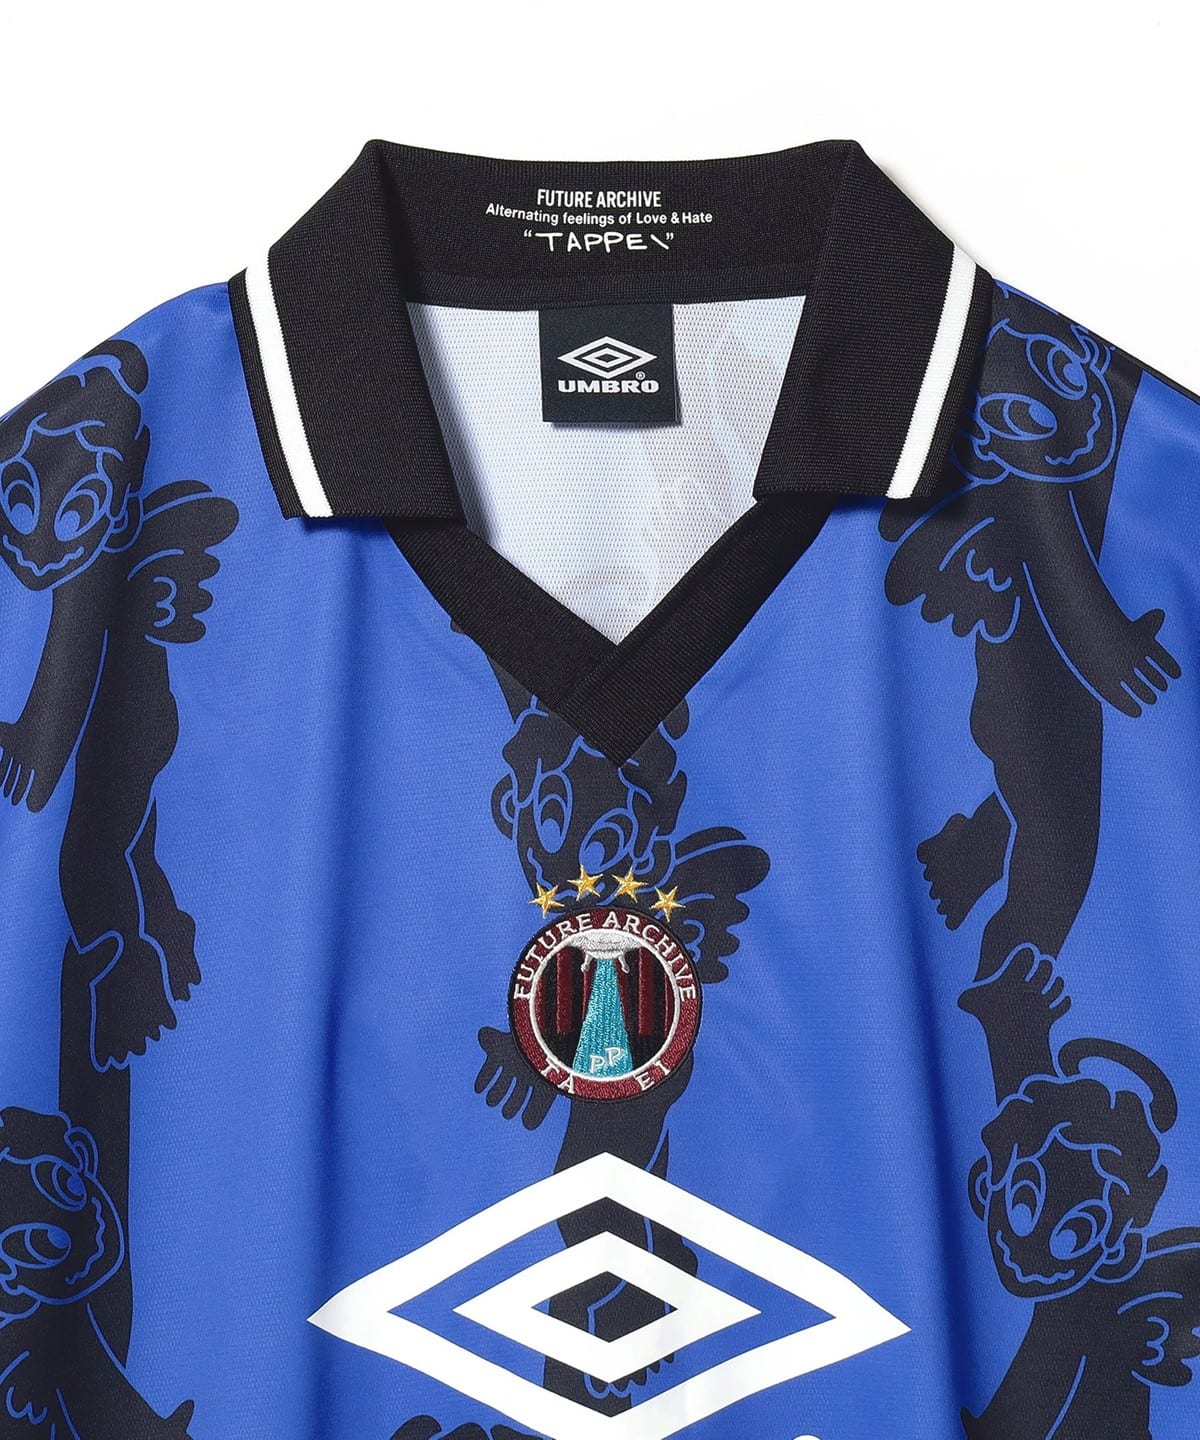 TAPPEI UMBRO FUTURE ARCHIVE Game Shirtトップス